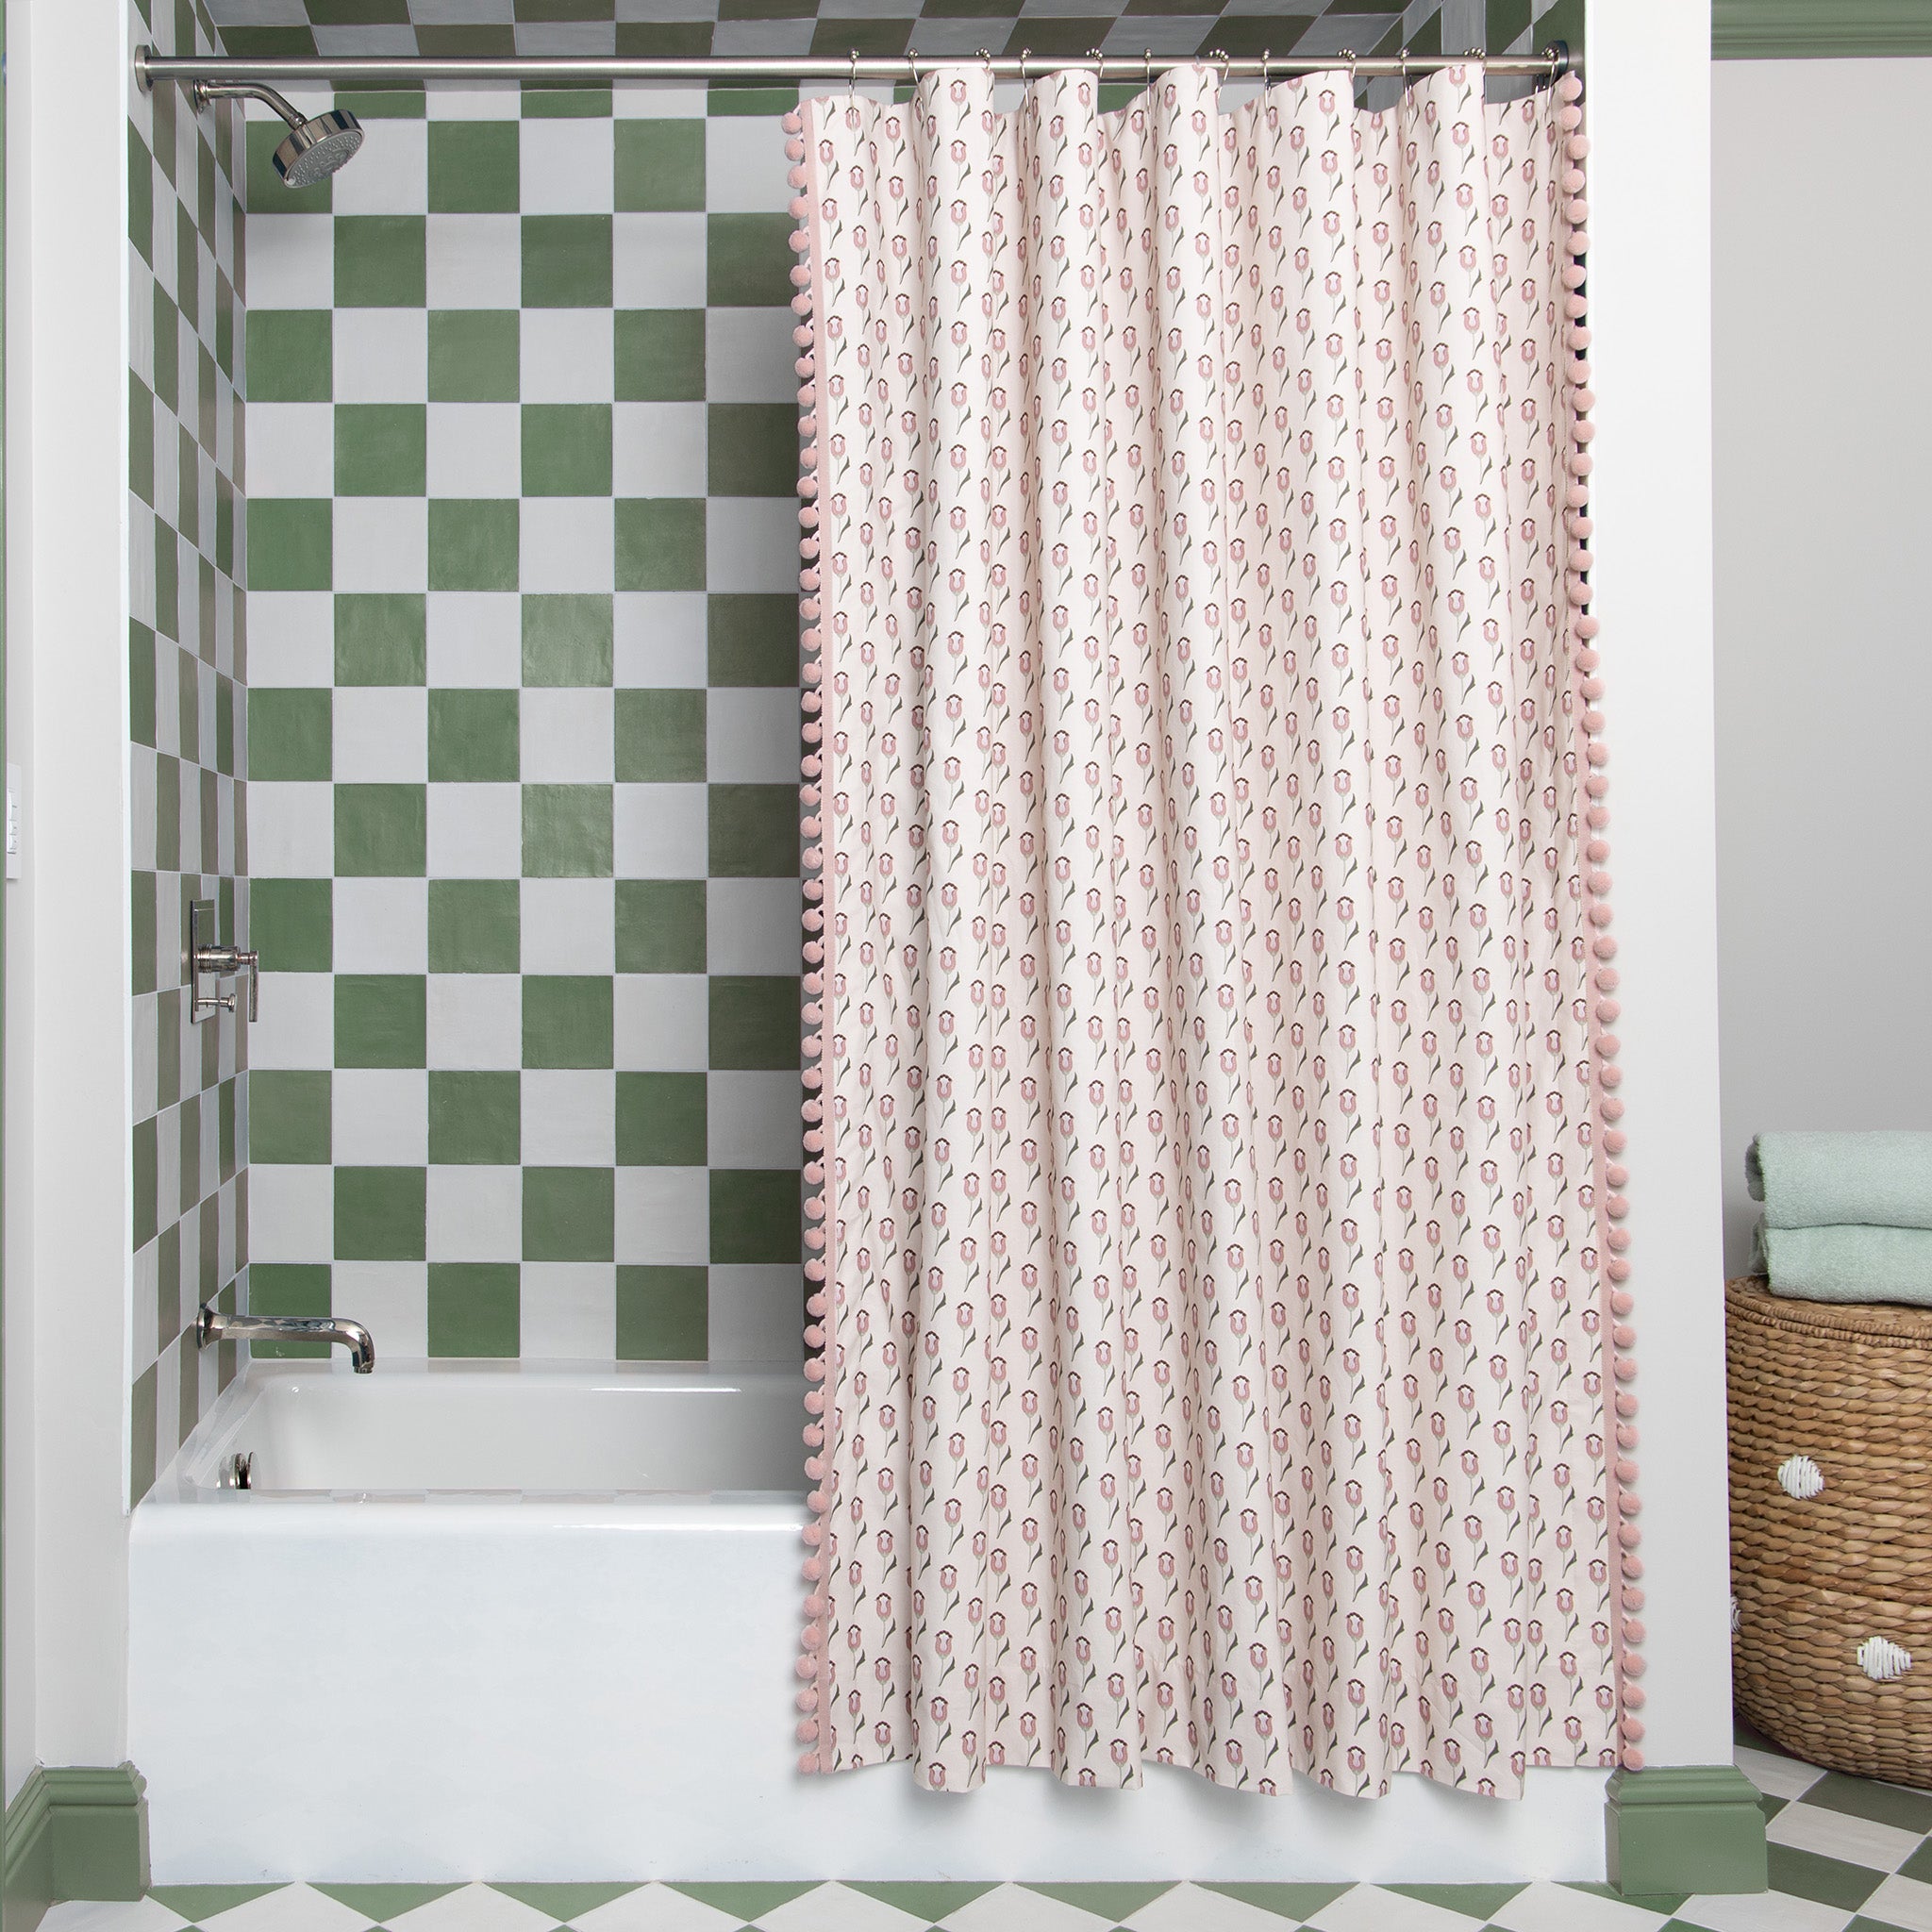 abstract pink and green floral patterned shower curtain with pink pom poms hanging in a bathroom shower with green and white tiles